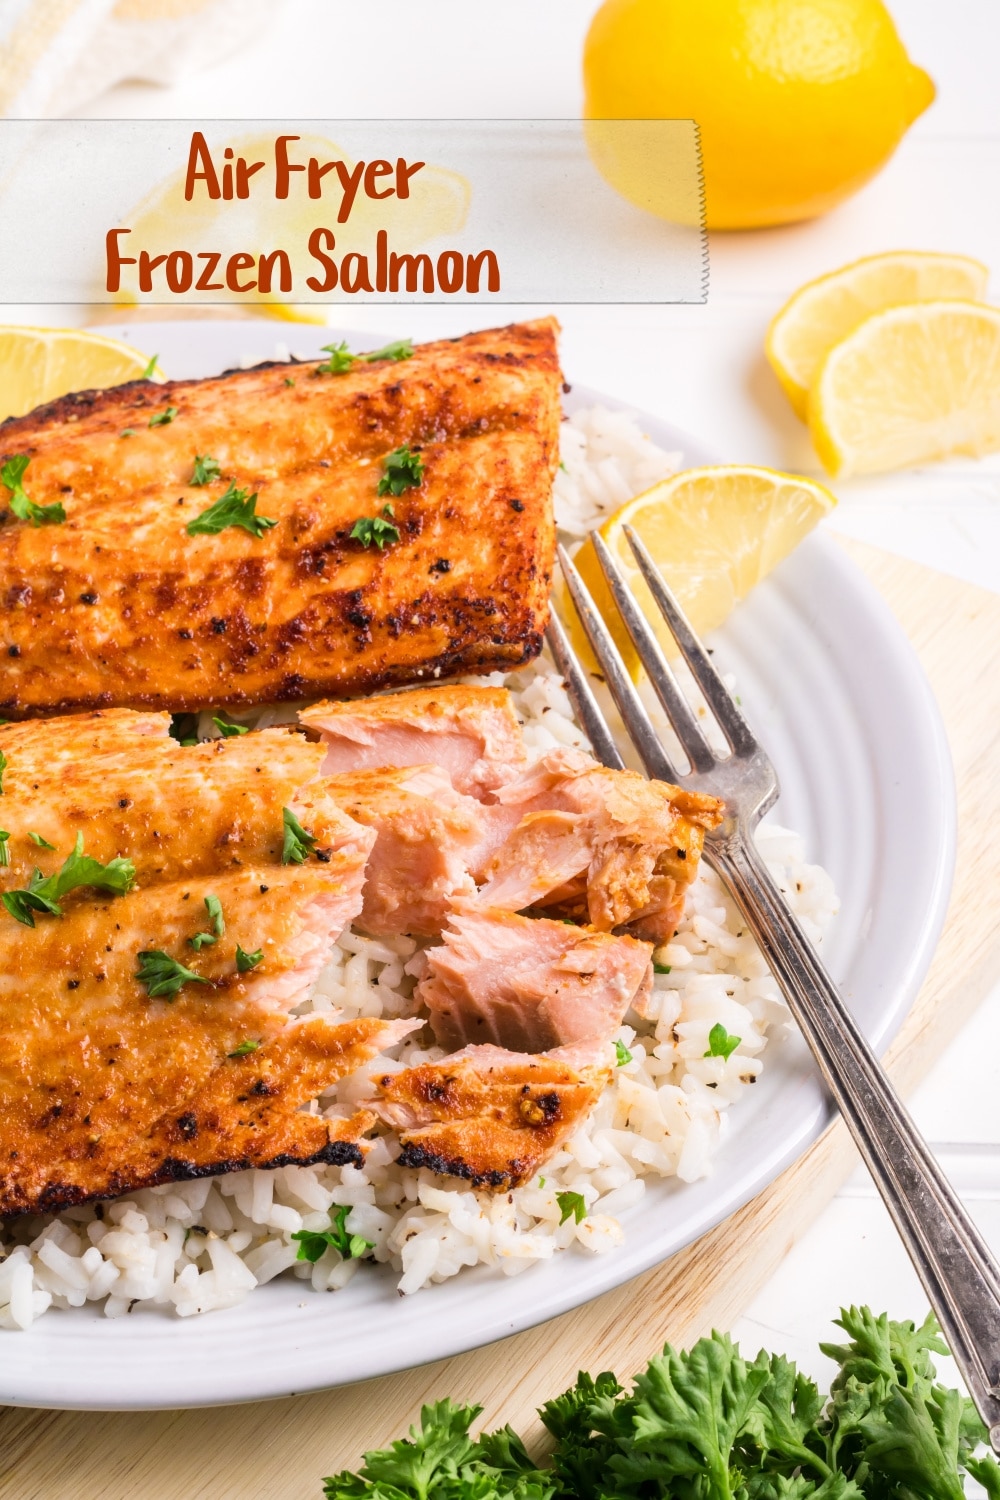 Air fryer frozen salmon is ready to enjoy in less than 20 minutes, making it an ideal dinner option for busy weeknights. You don't have to thaw the fillets beforehand; they can be cooked directly from the freezer, simplifying dinner preparation. via @cmpollak1